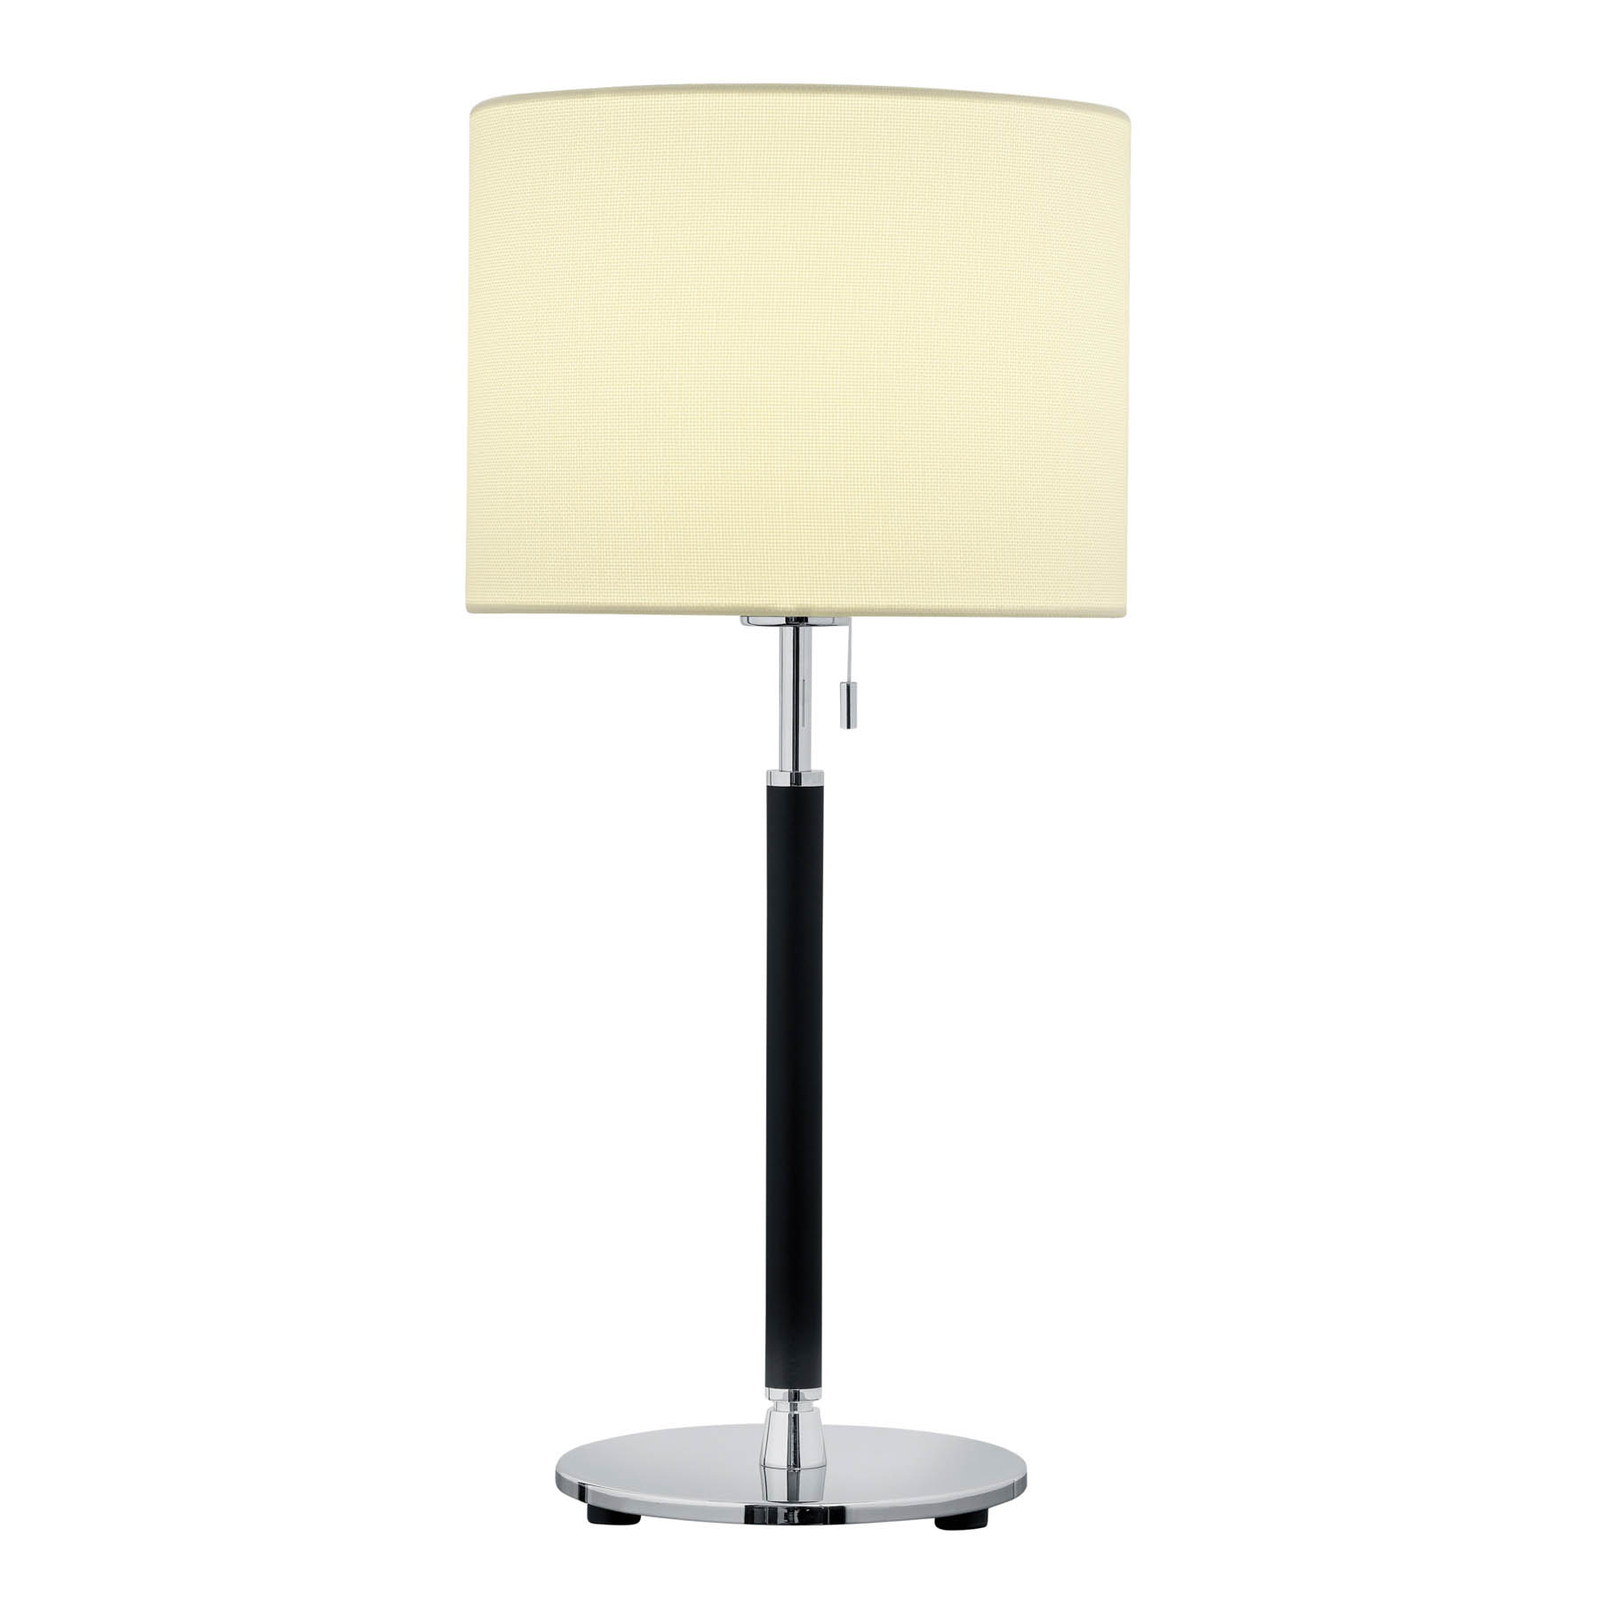 Pull table lamp, fabric lampshade, 53 cm